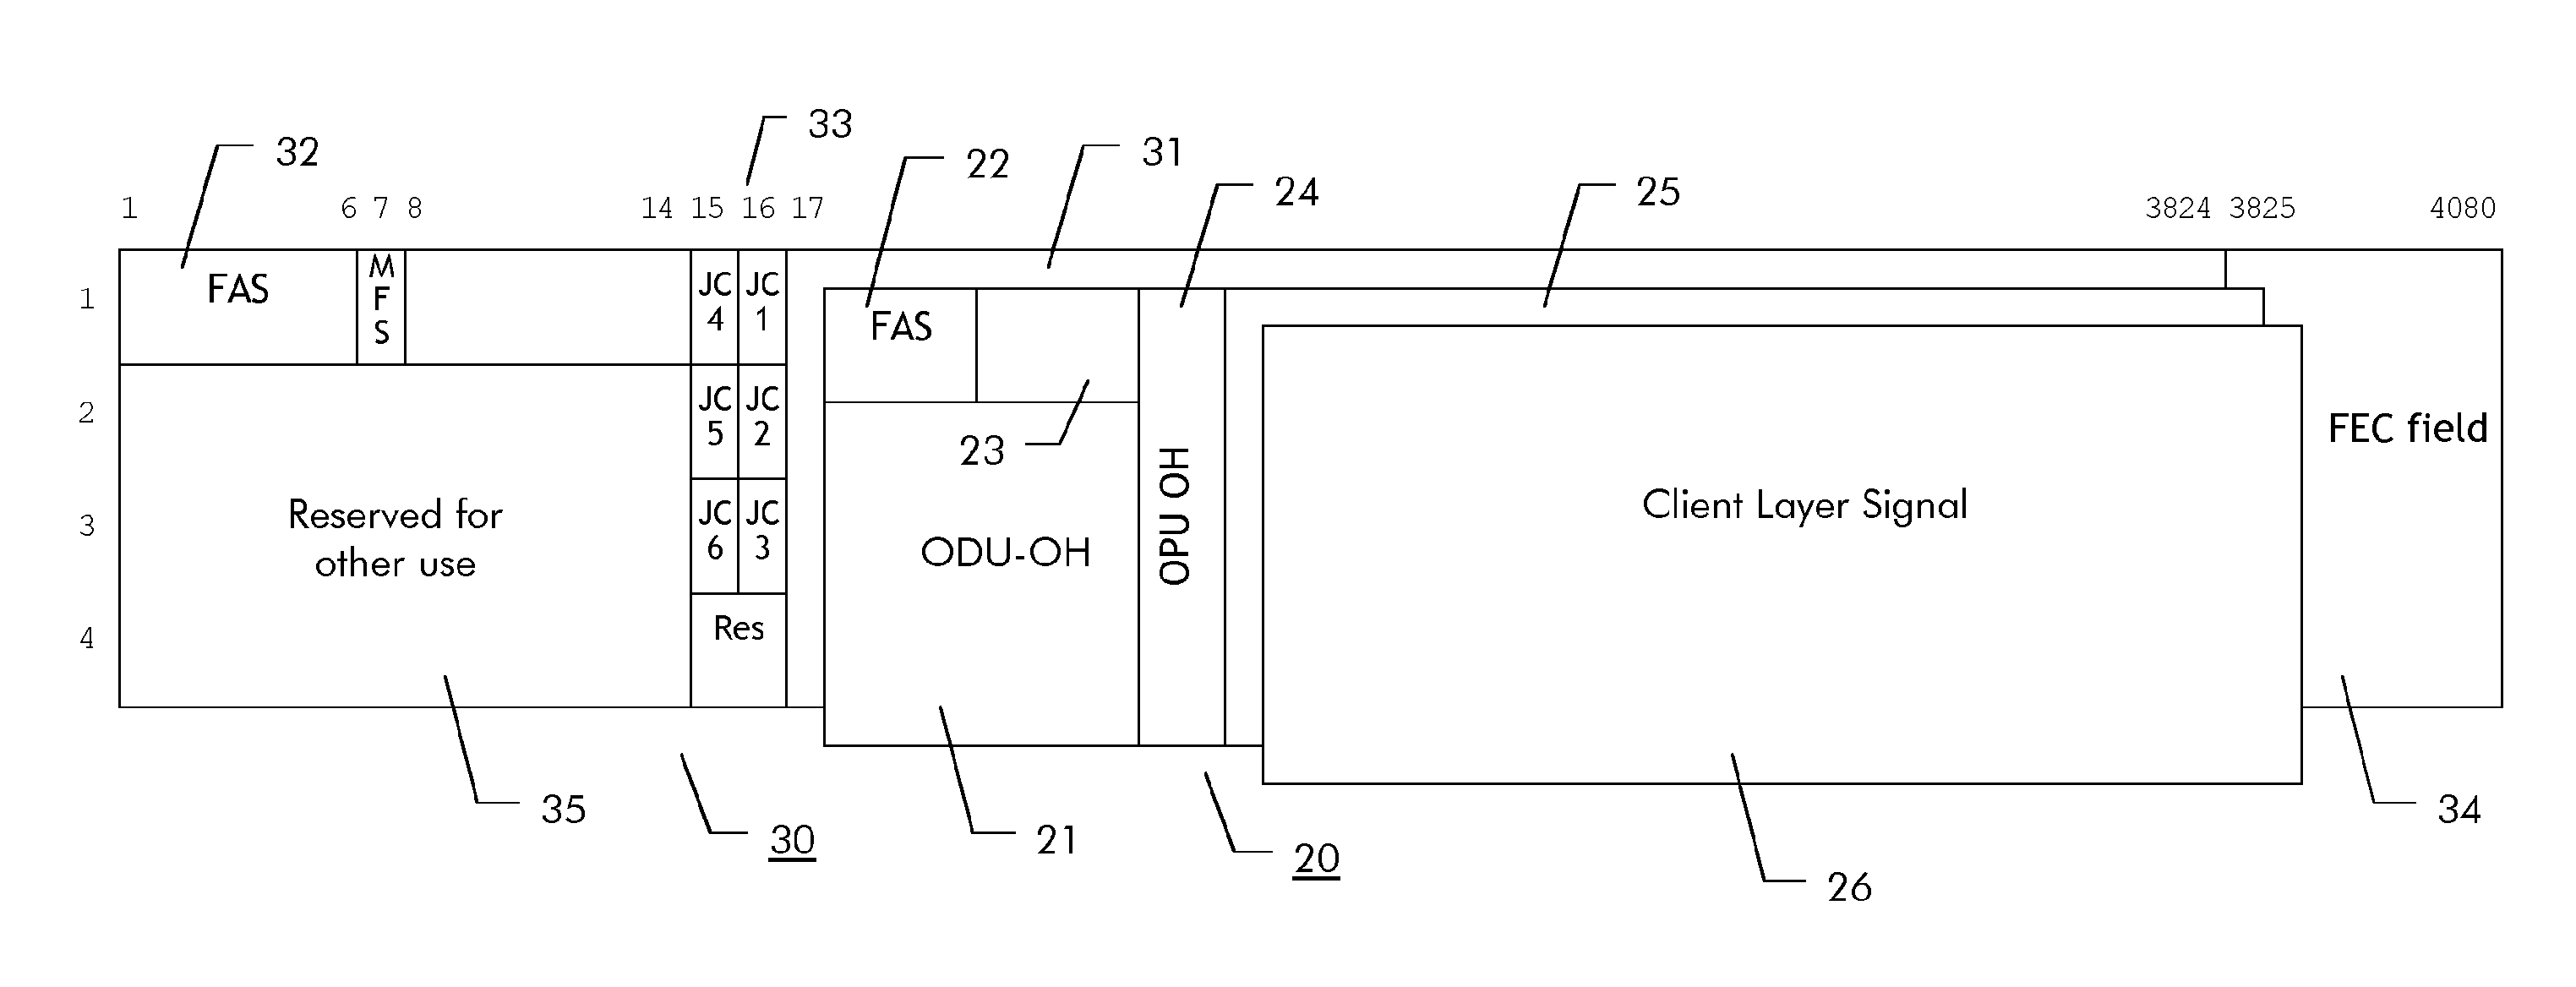 Method and apparatus for transmitting an asynchronous transport signal over an optical section